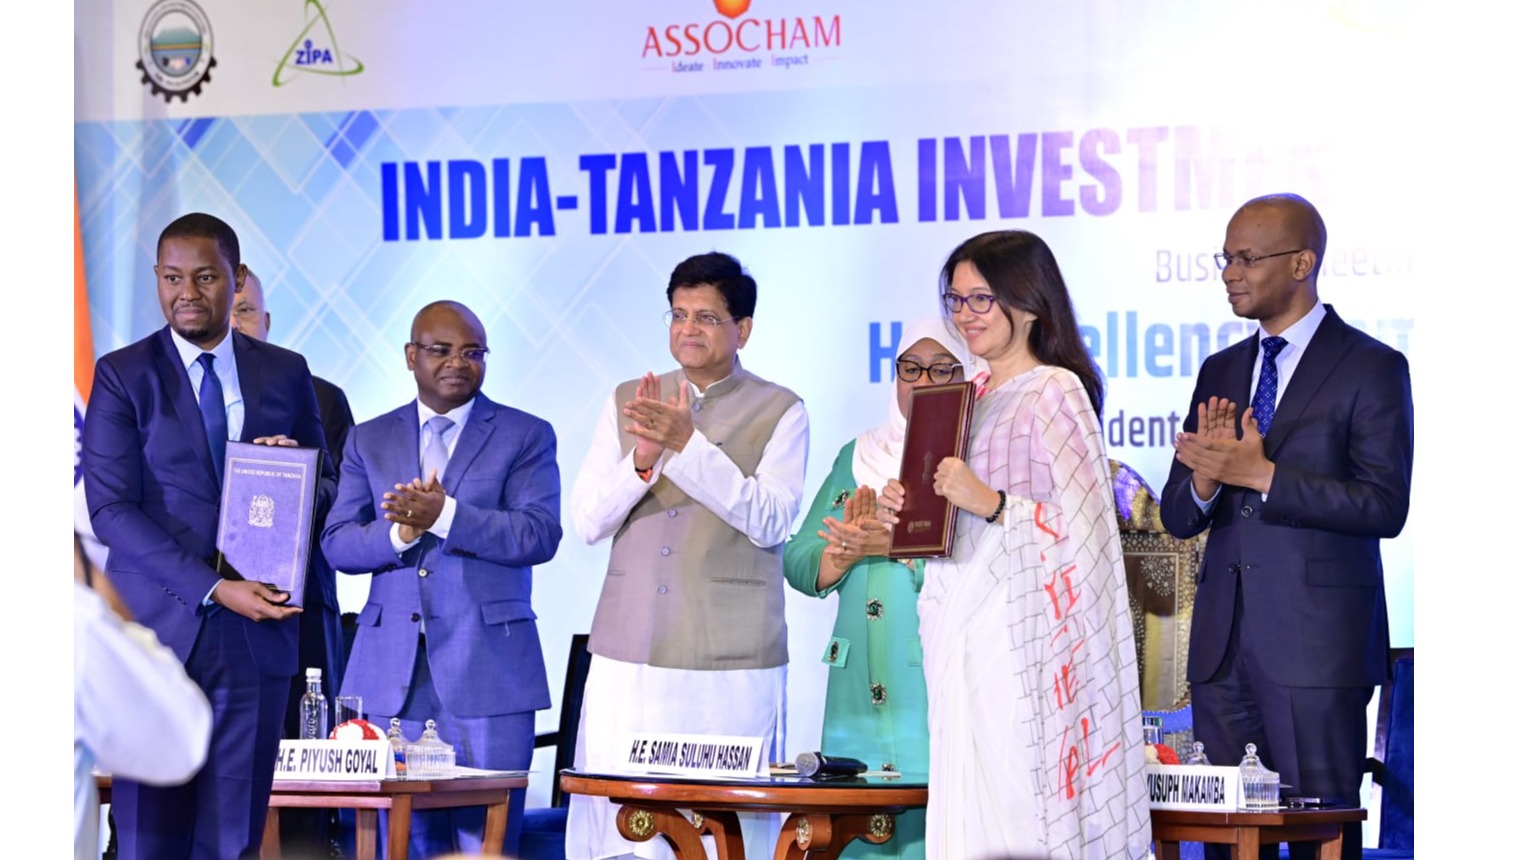 The President of the United Republic of Tanzania Hon. Dr. Samia Suluhu Hassan while on tour in India, participated in various events.